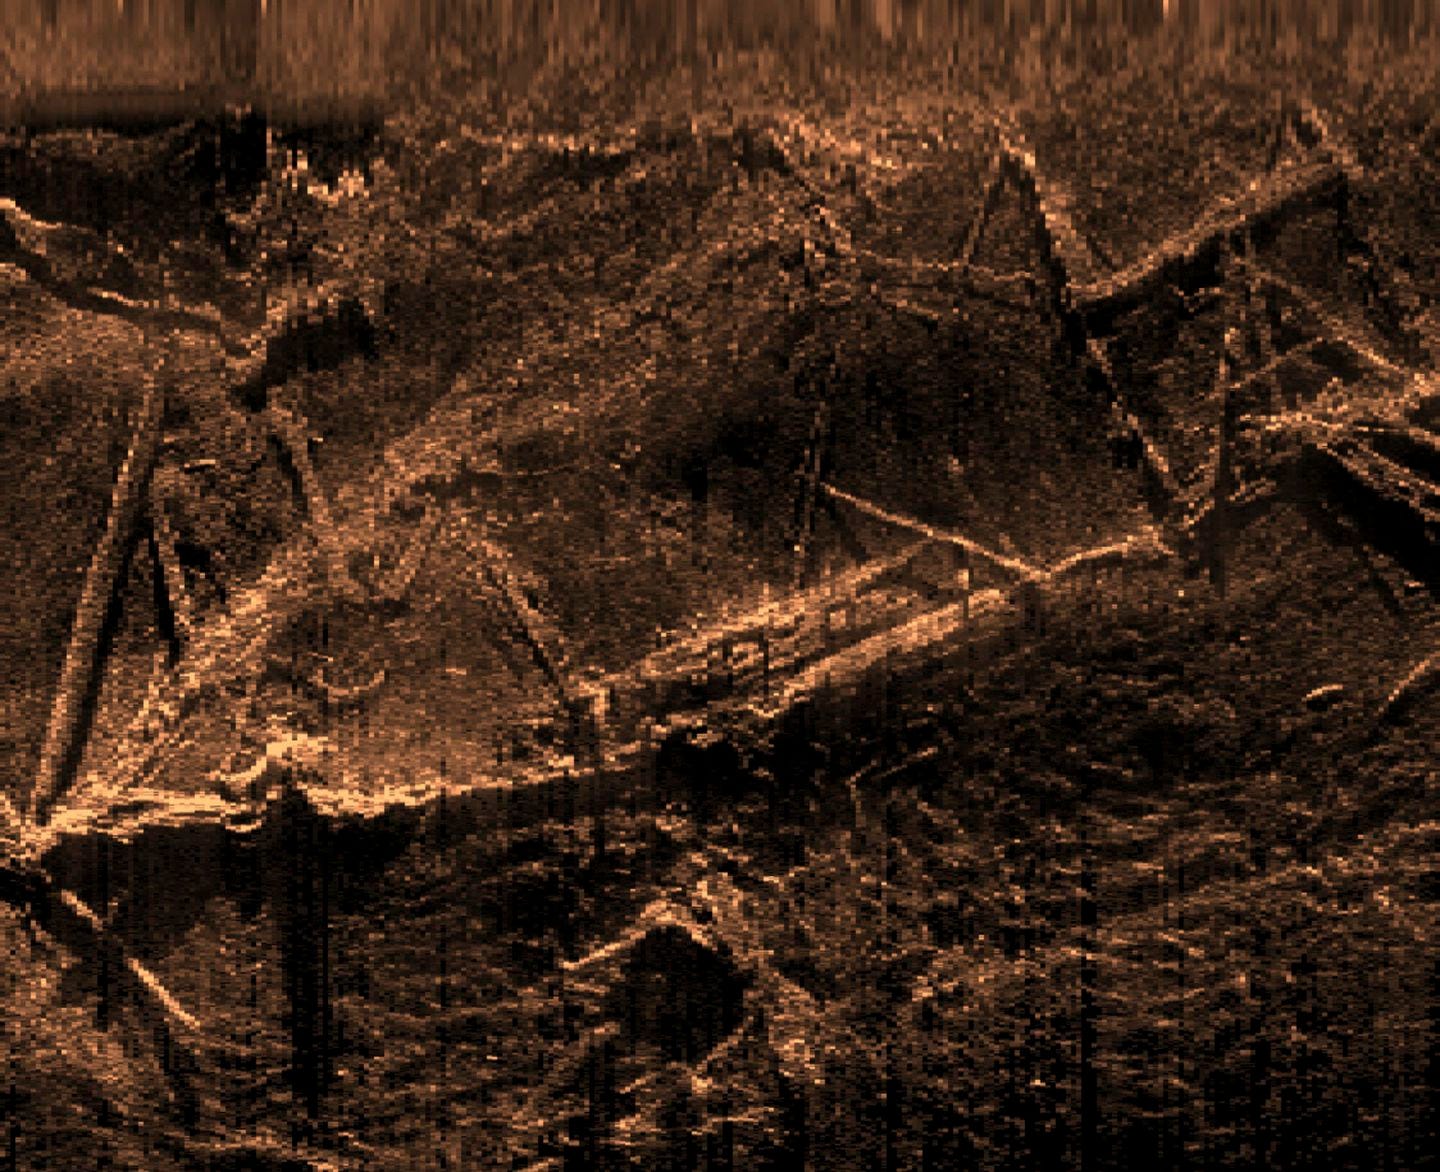 A sonar image provided by the Alabama Historical Commission showed the remains of the Clotilda, the last known US ship involved in the trans-Atlantic slave trade, which lies submerged near Mobile, Ala.